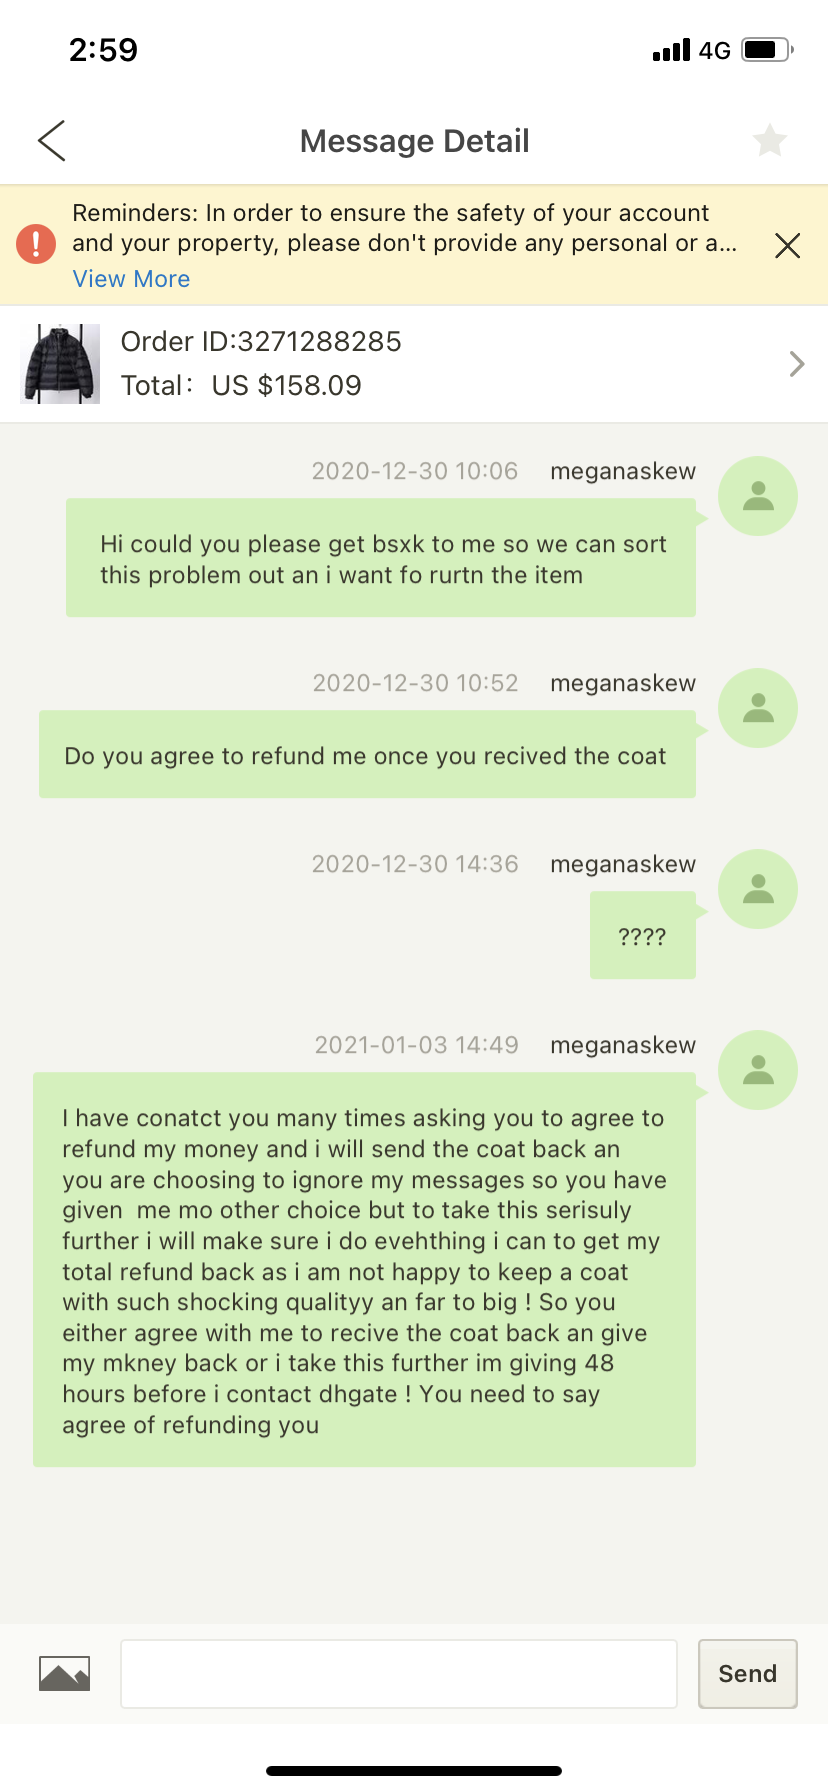 DHgate.com complaint Help with my ongoing case that iv had no support with !!